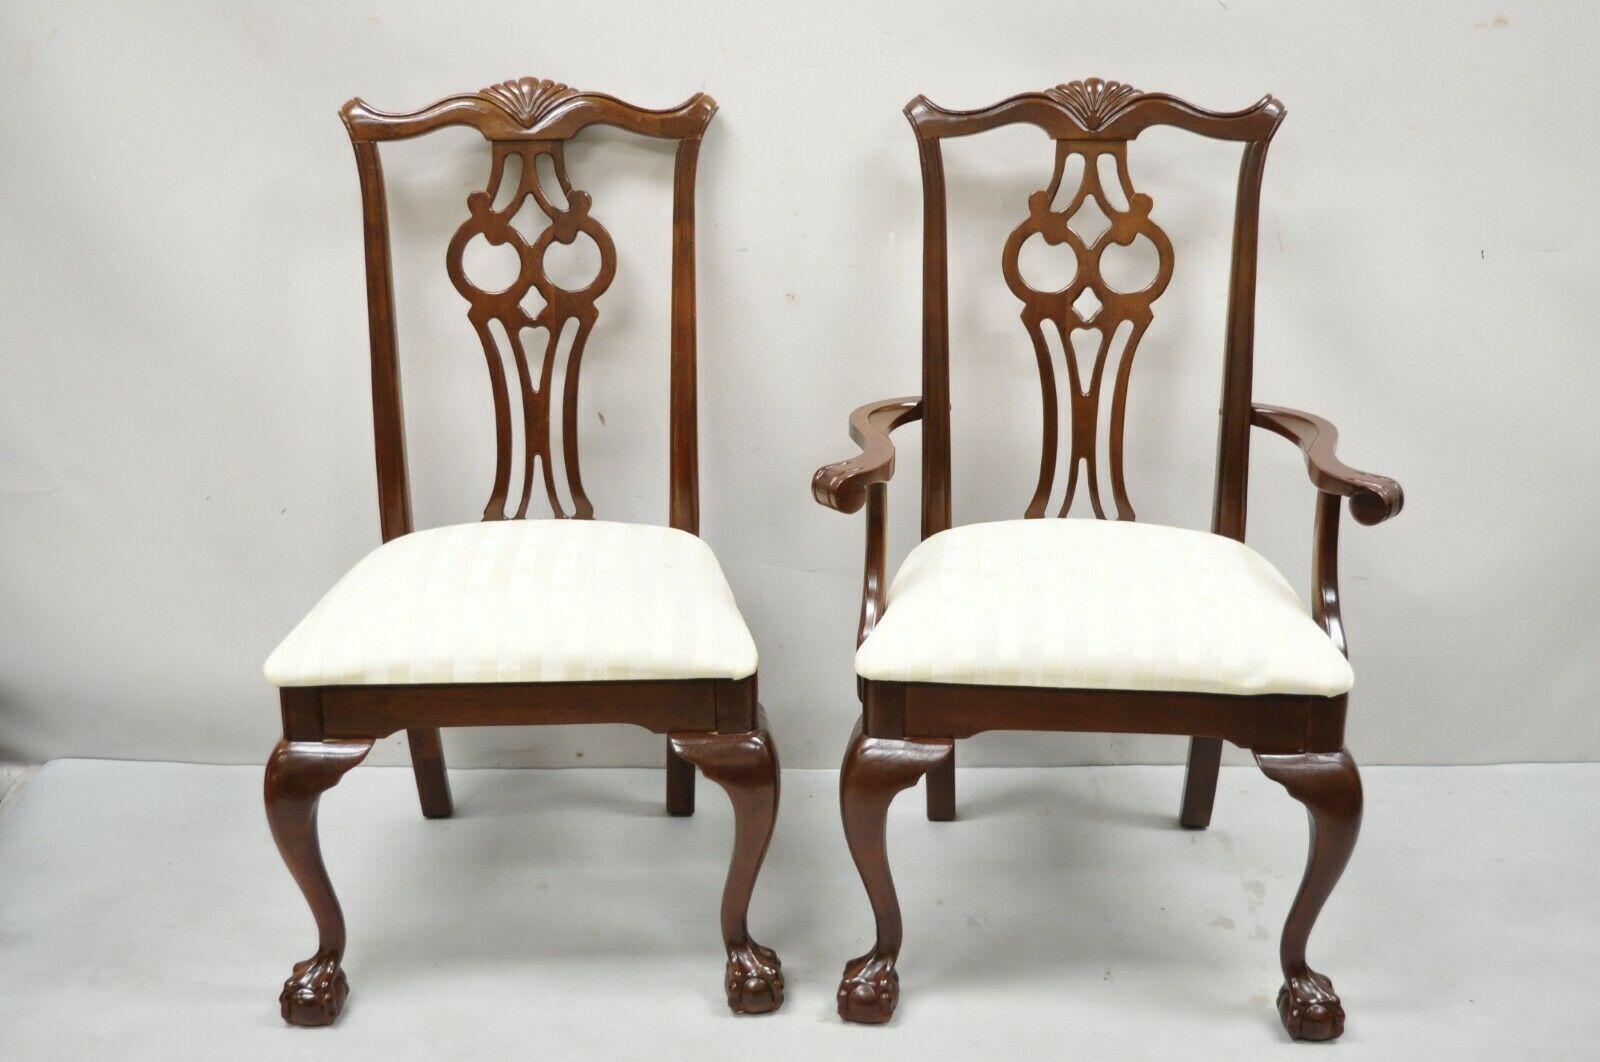 Vintage American drew cherry wood Chippendale style dining chairs - set of 6. (4) Side chairs and (2) armchairs. Items features a beautiful wood grain, nicely carved details, original label, carved ball and claw feet, quality American craftsmanship,